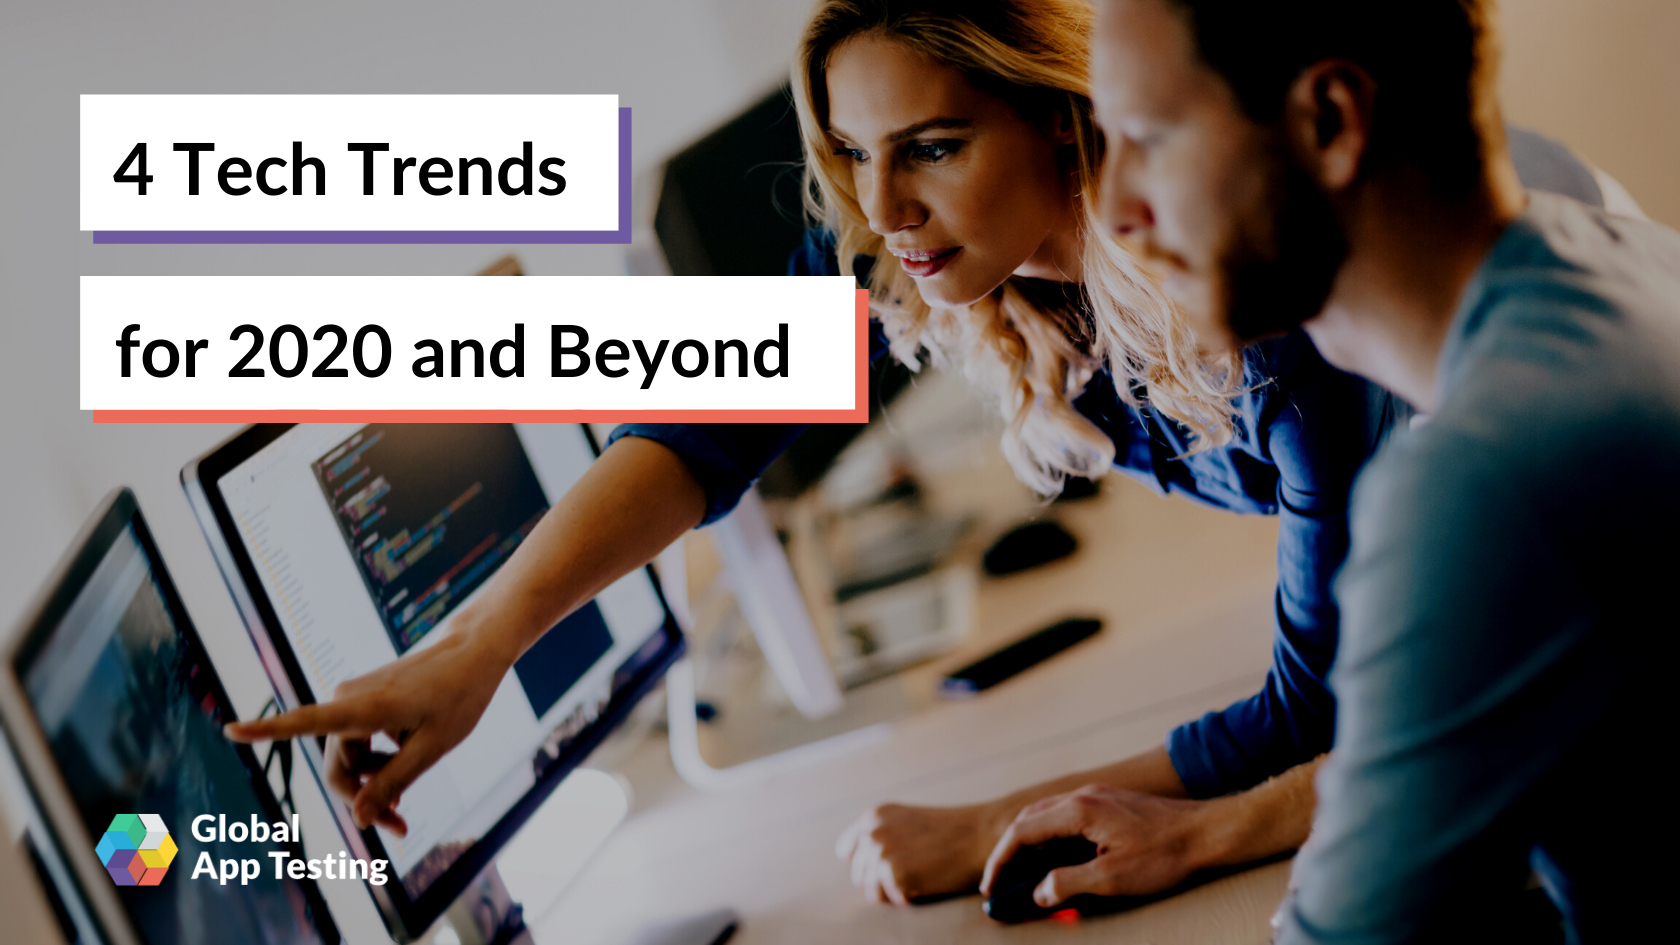 4 Tech Trends for 2020 and Beyond